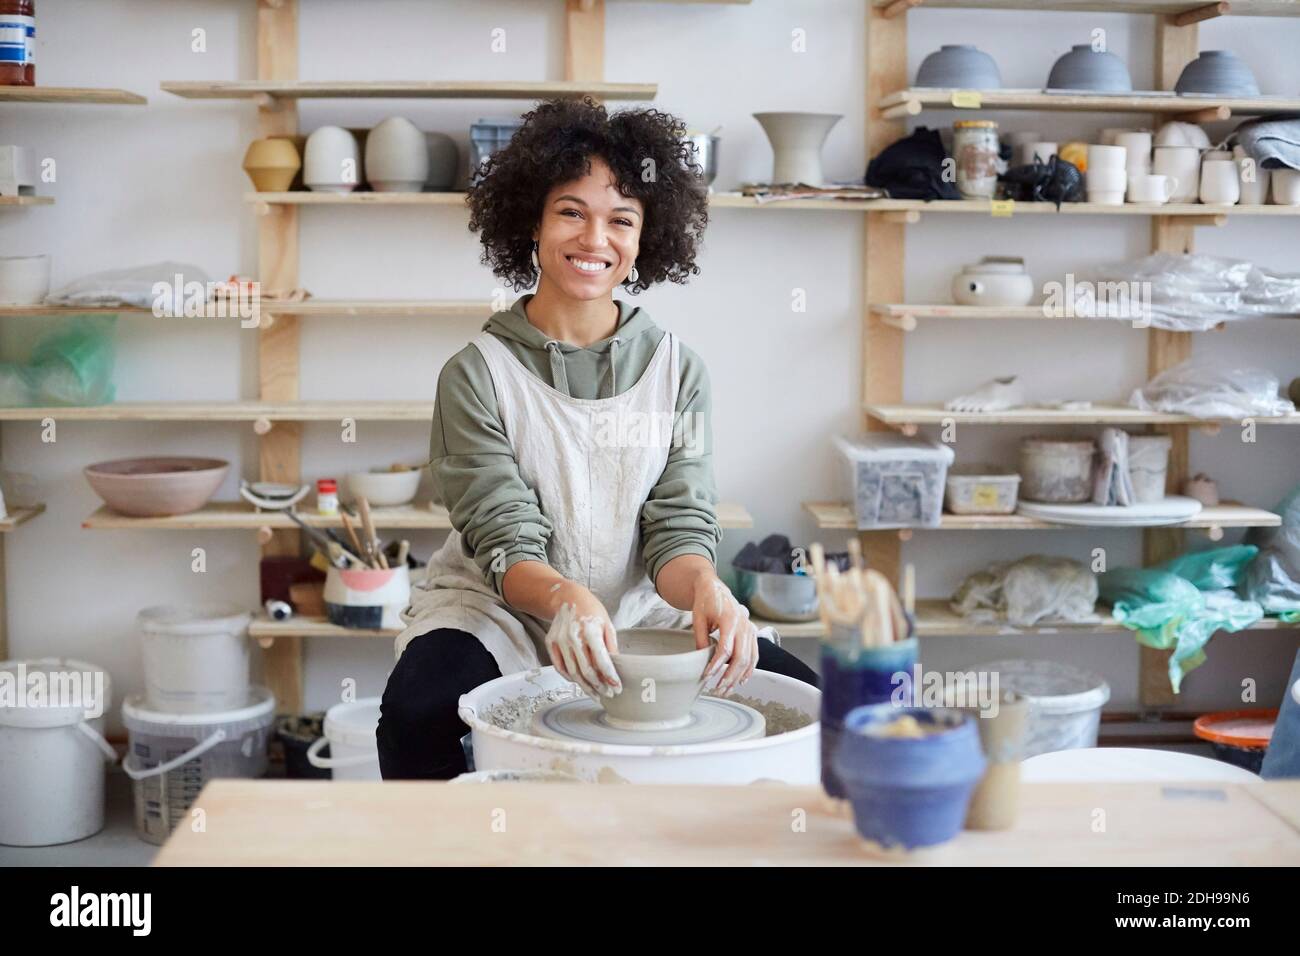 Portrait of smiling woman learning pottery in art studio Stock Photo